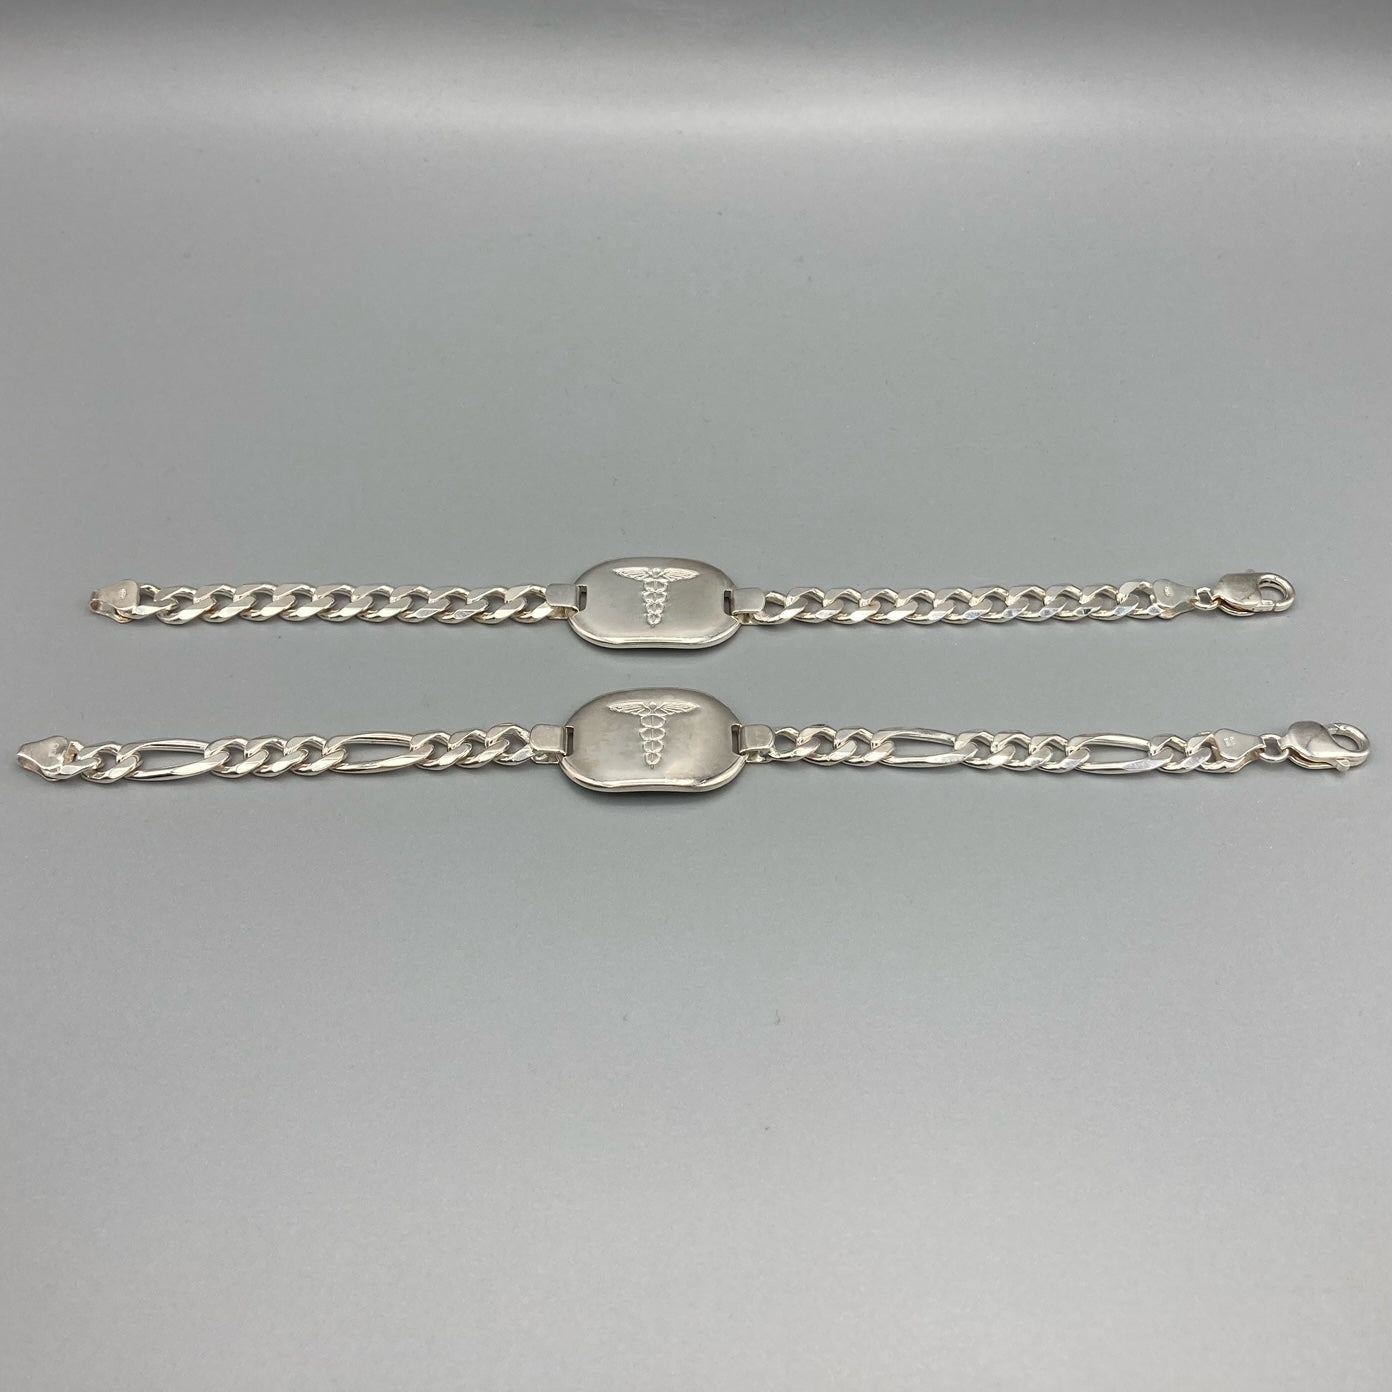 Solid Heavy Sterling Silver Medic Alert Bracelet with Custom Engraving Included